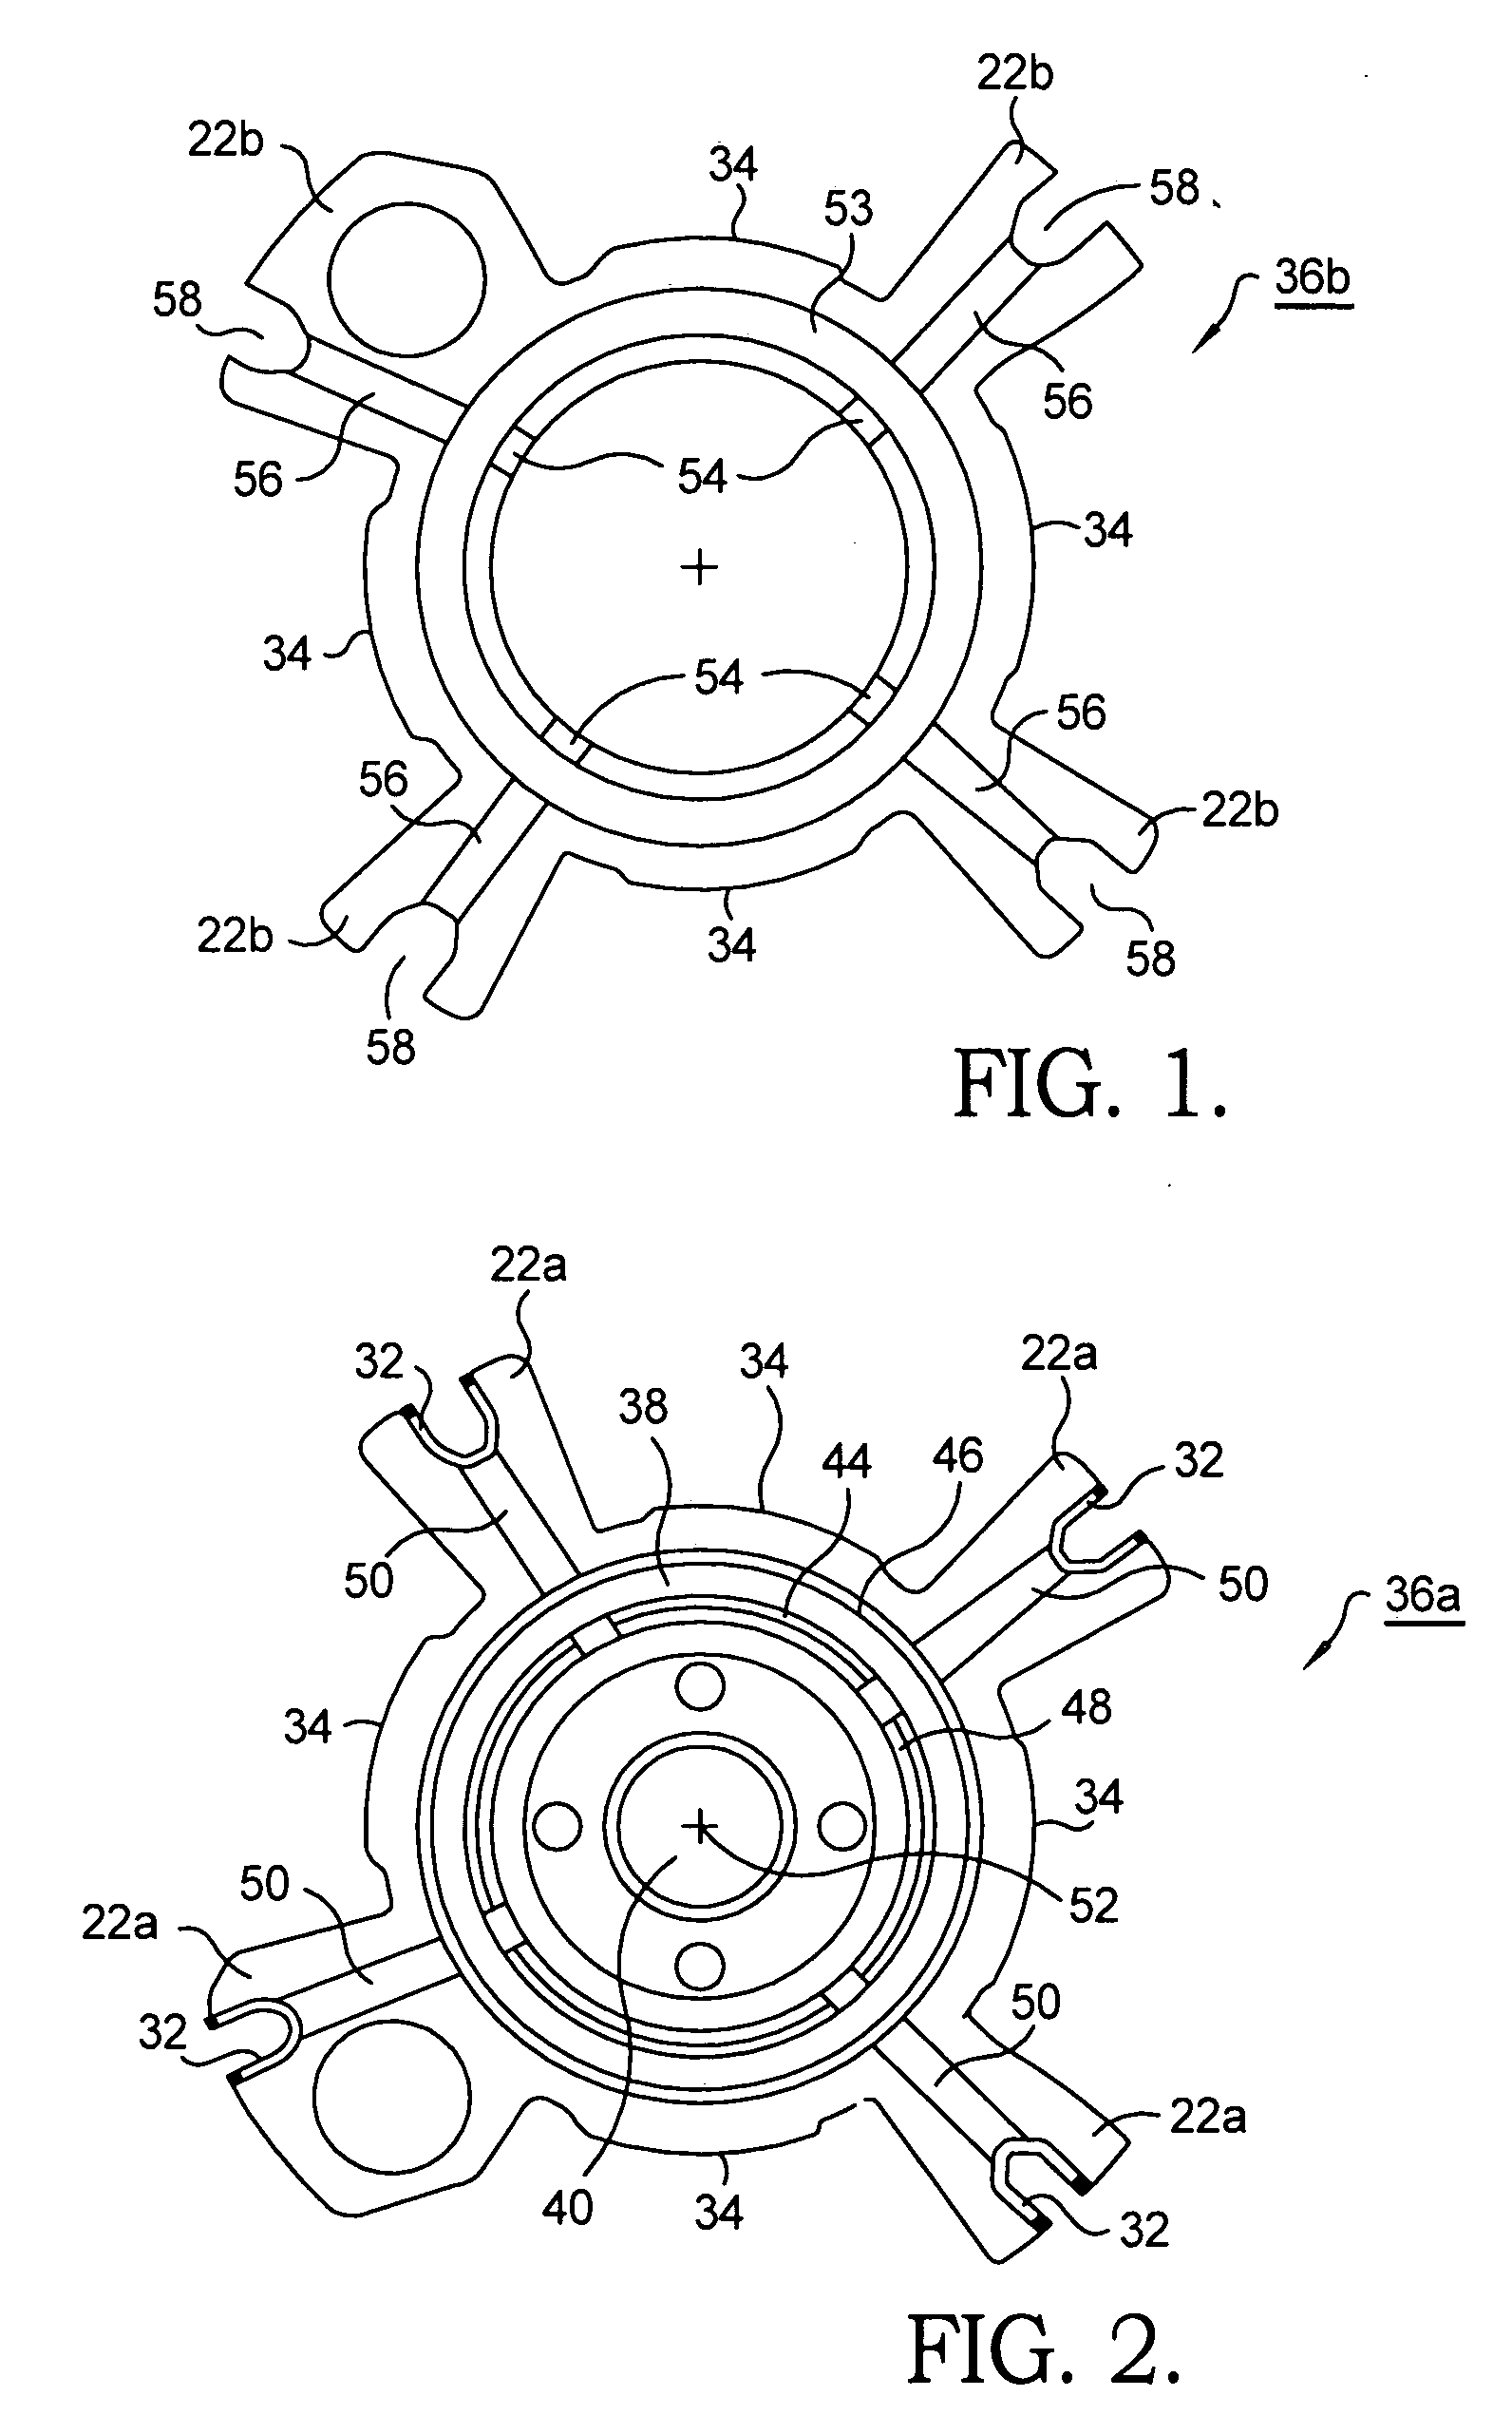 Axial lash control for a vane-type cam phaser